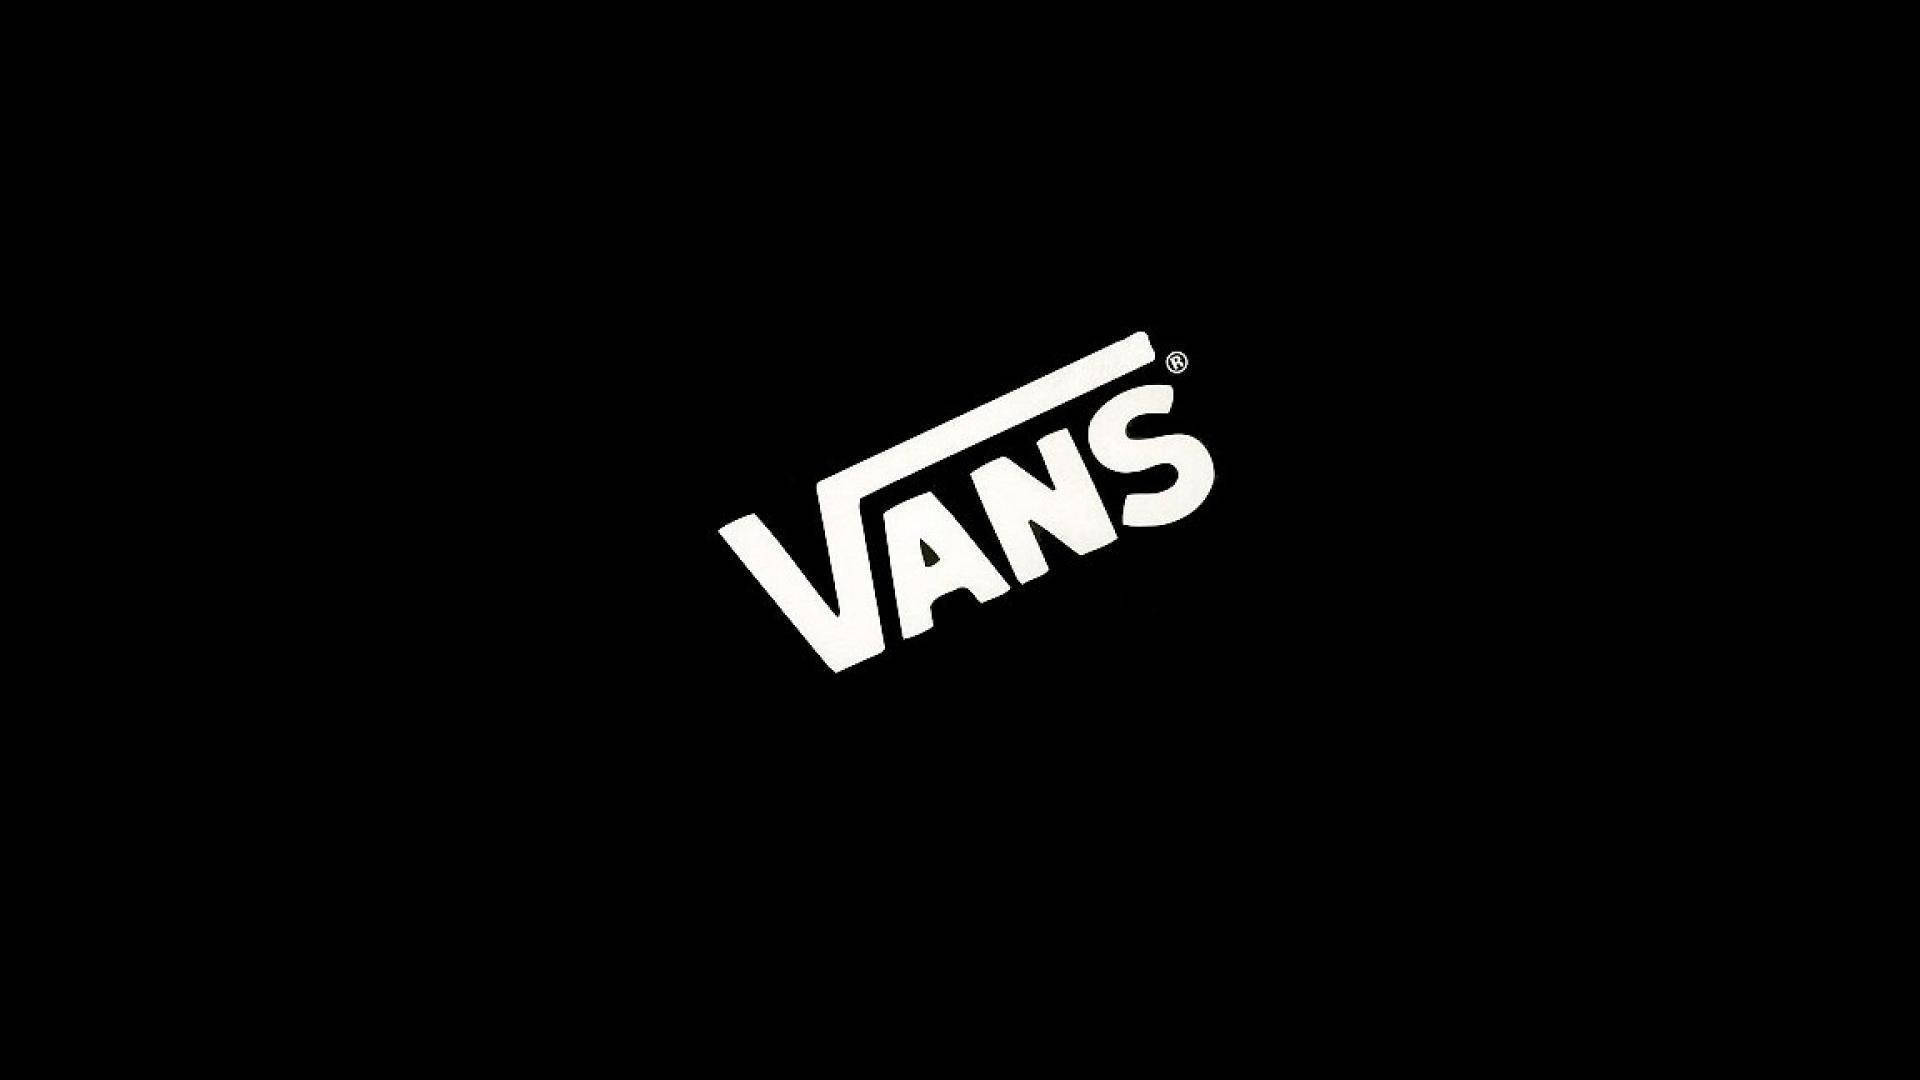 Vans Off The Wall Wallpapers